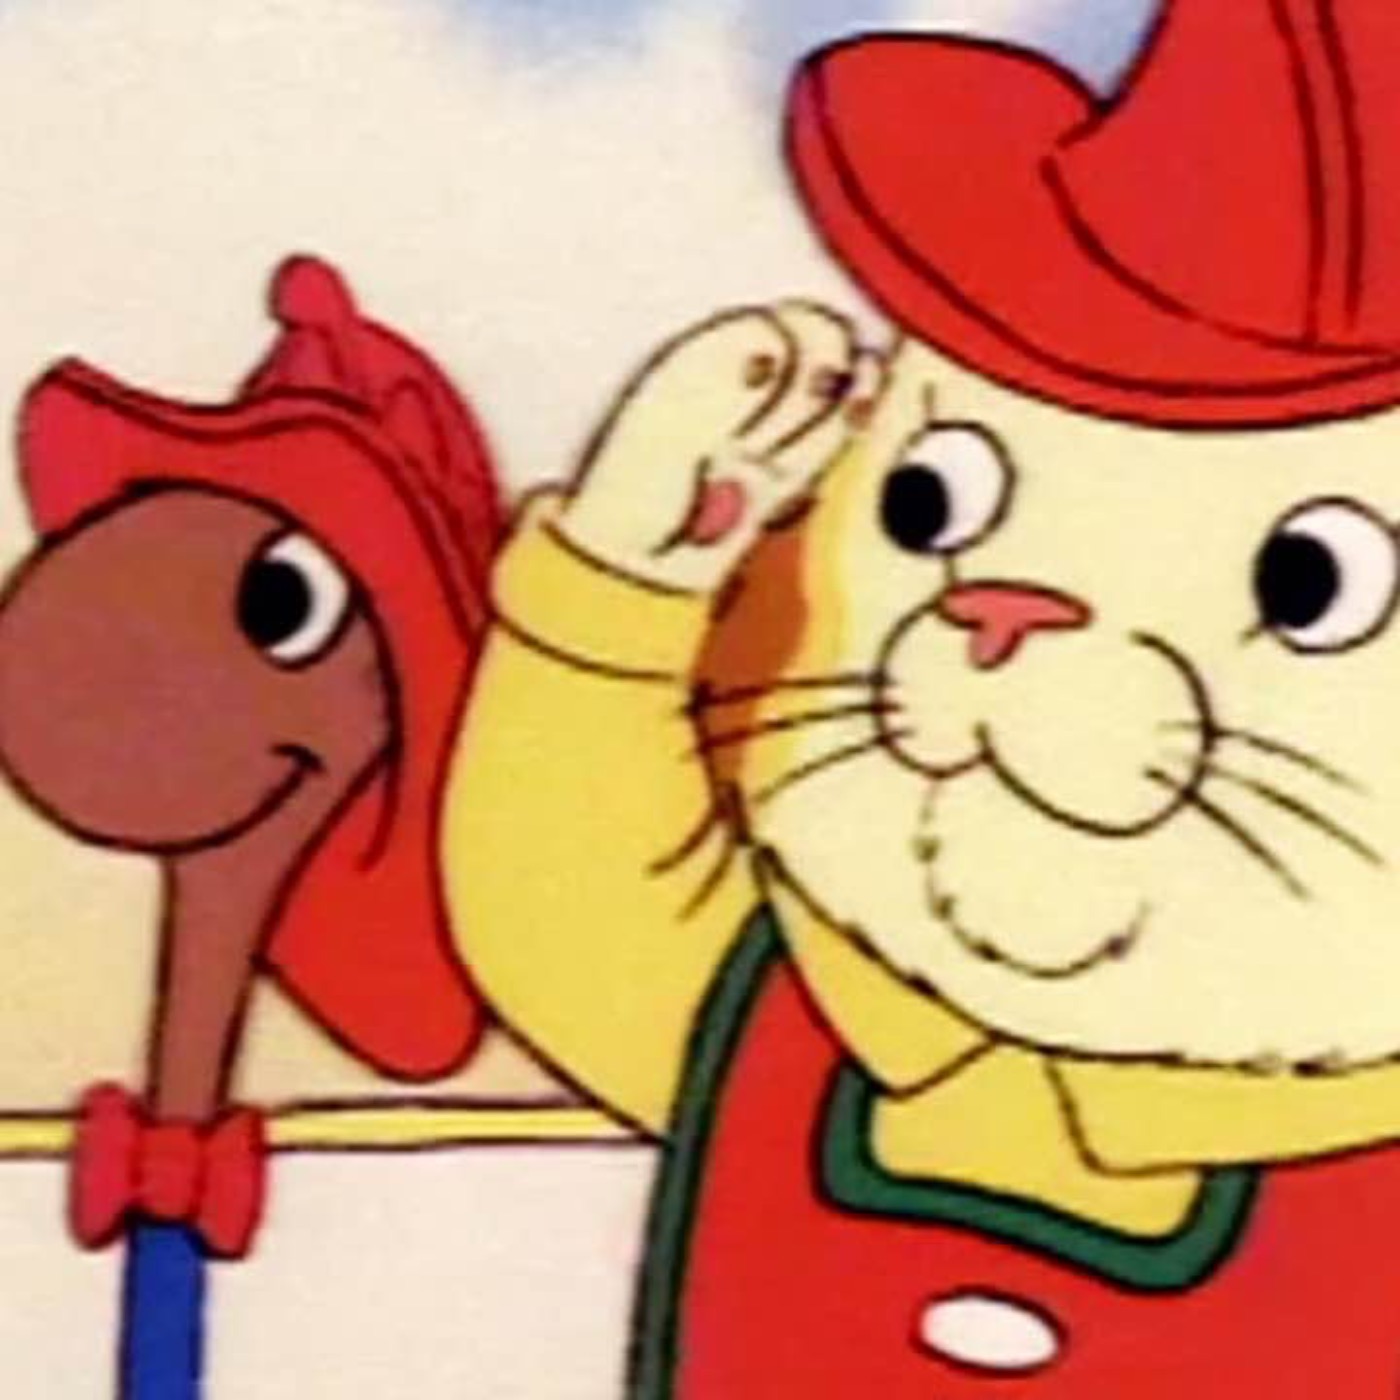 Episode 658: The Bussy World of Richard Scarry